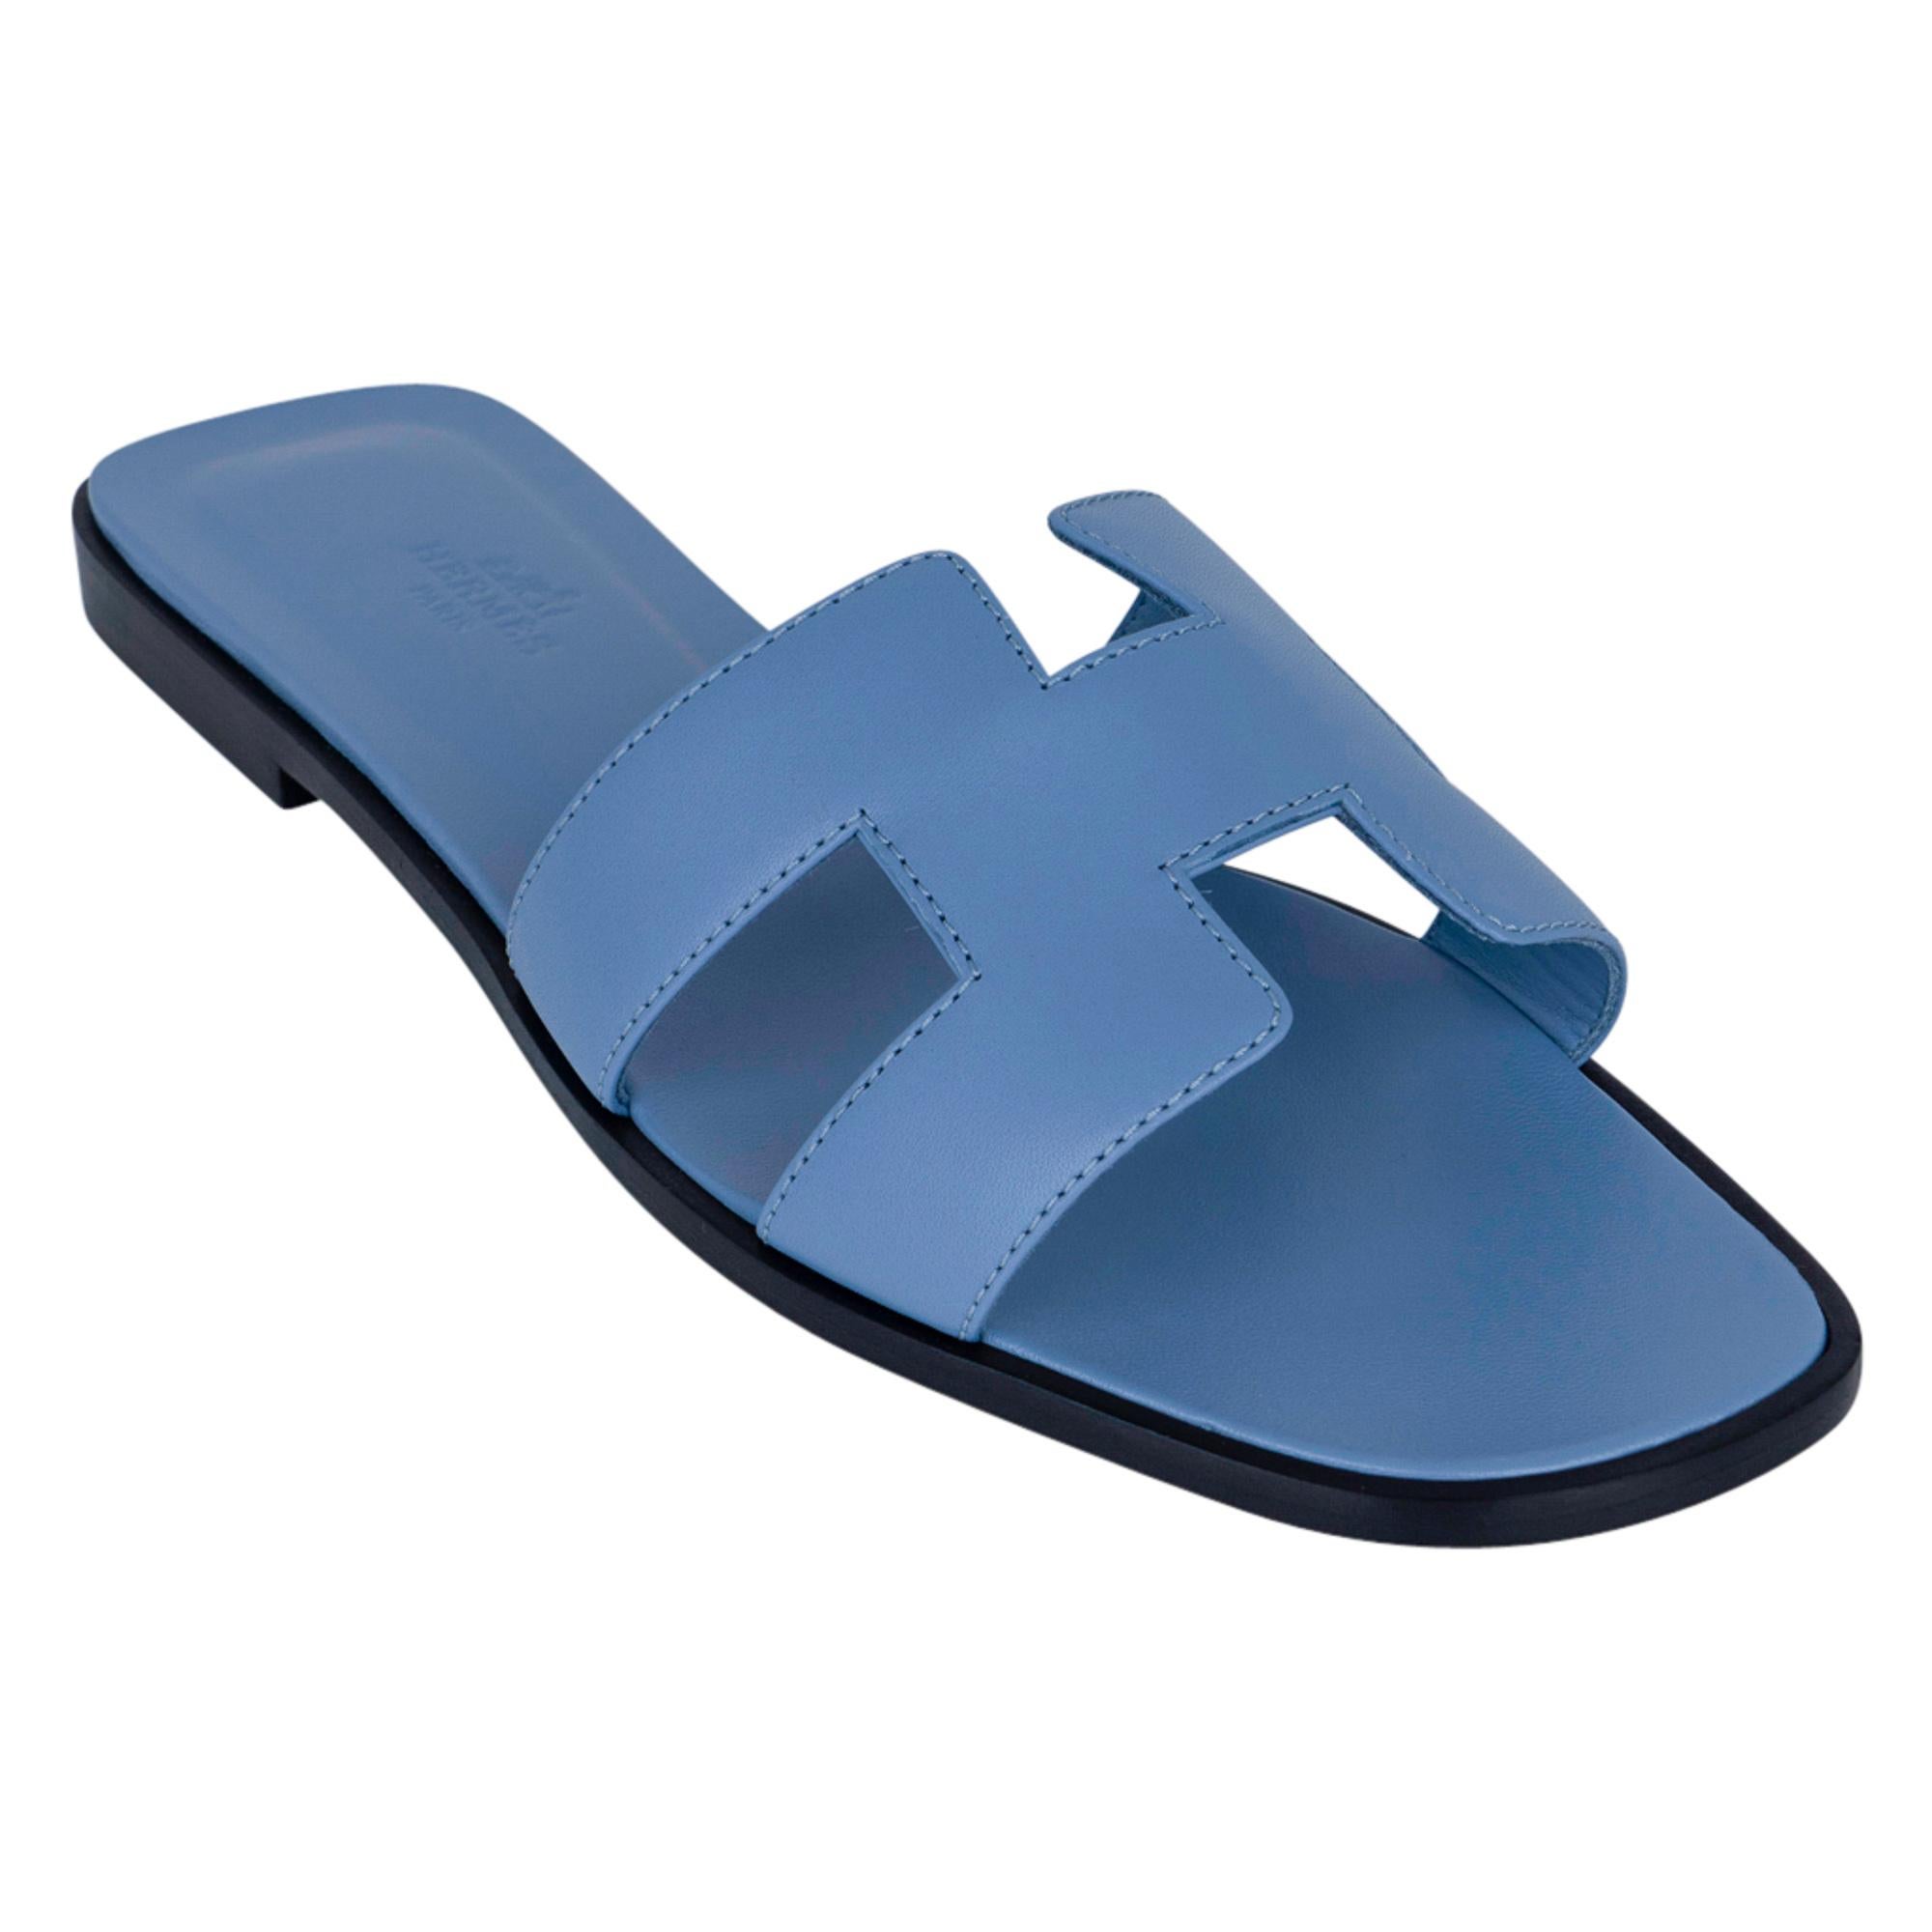 Mightychic offers a pair of Hermes Oran flat sandals featured in beautiful Bleu Bleuet.
These neutral blue slides are a must for foot flirting!
Hermes Paris embossed leather insole. 
Wood heel with leather sole. 
Comes with sleepers and and